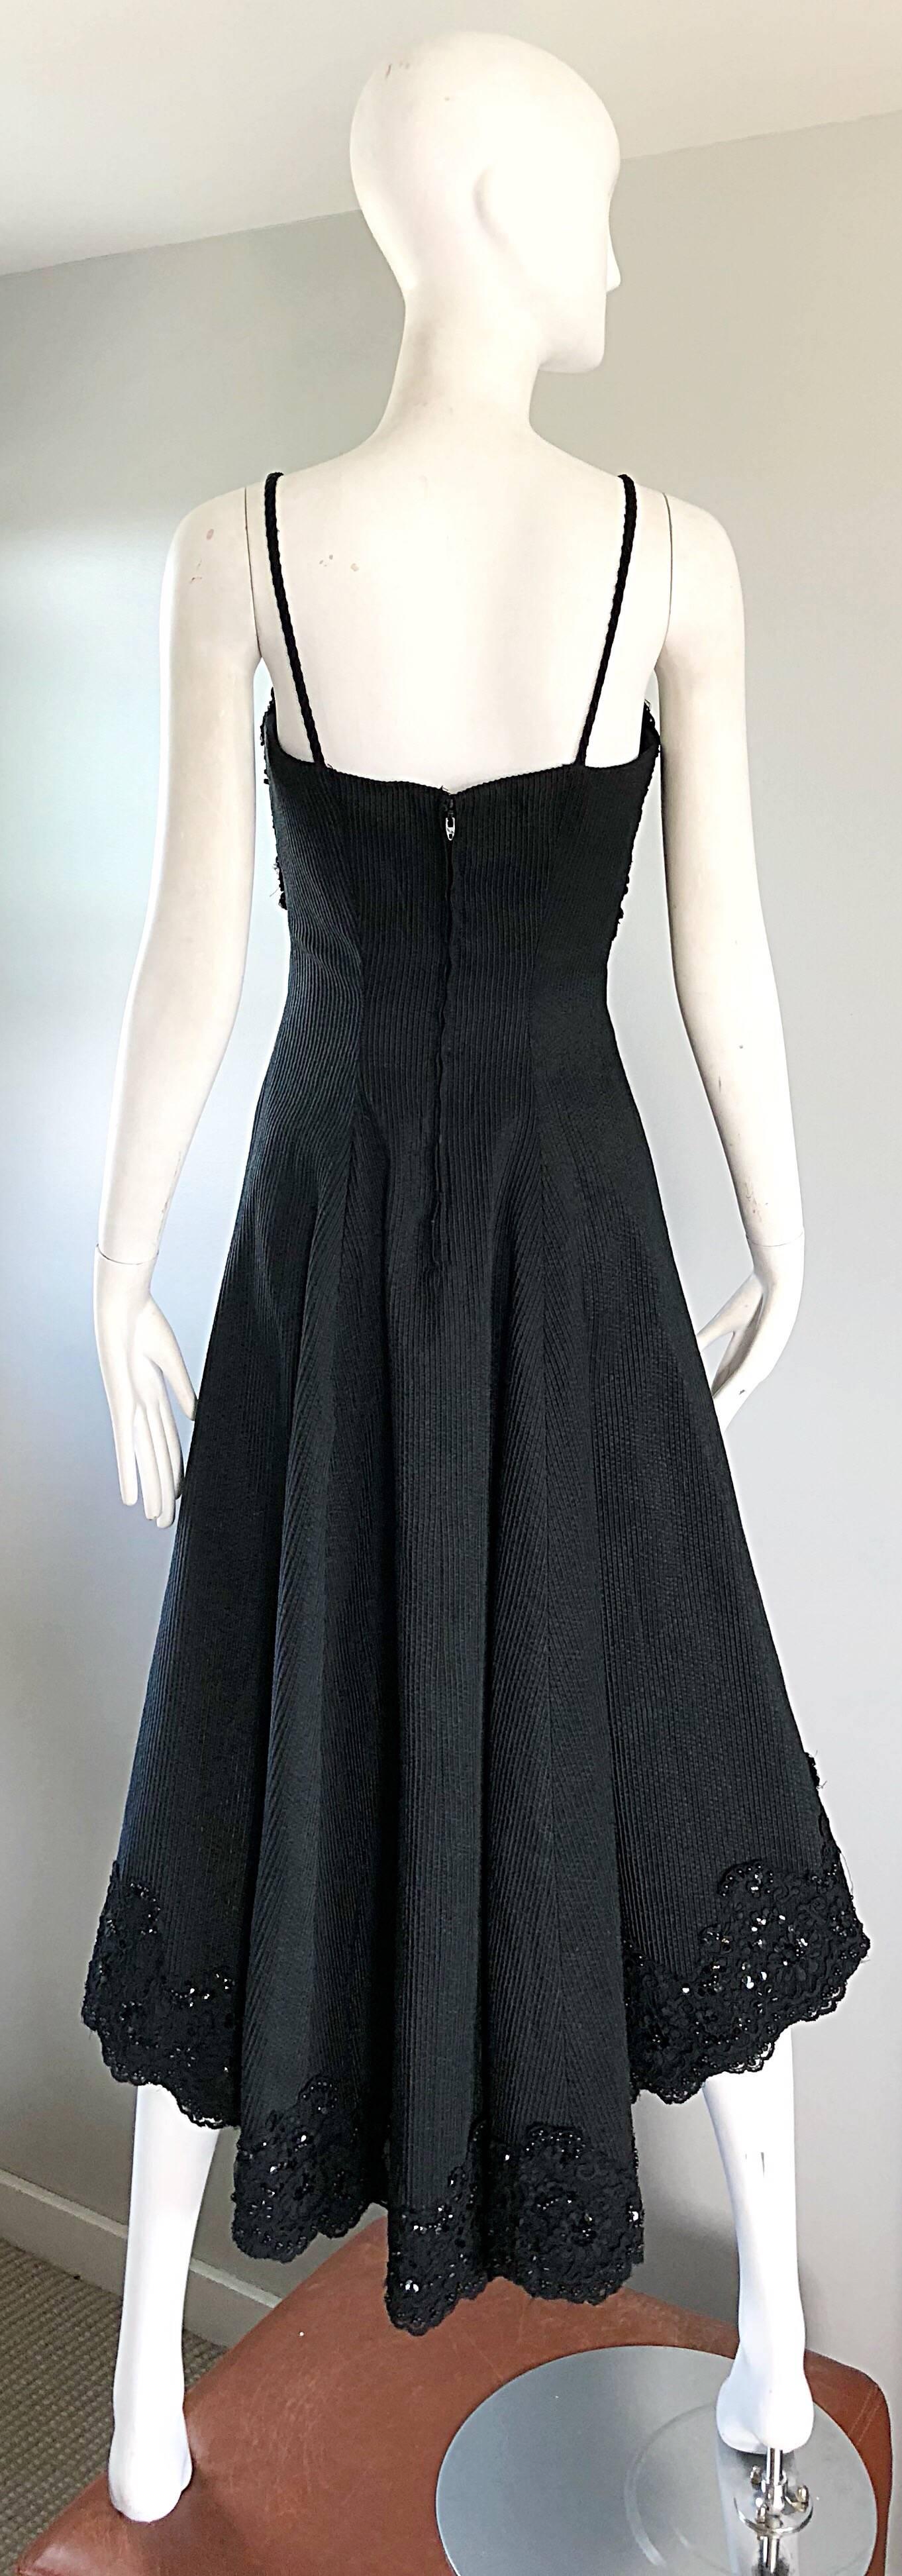 Women's 1990s Couture Black Silk Hi - Lo Beaded Sleeveless 50s Style Cocktail Dress For Sale